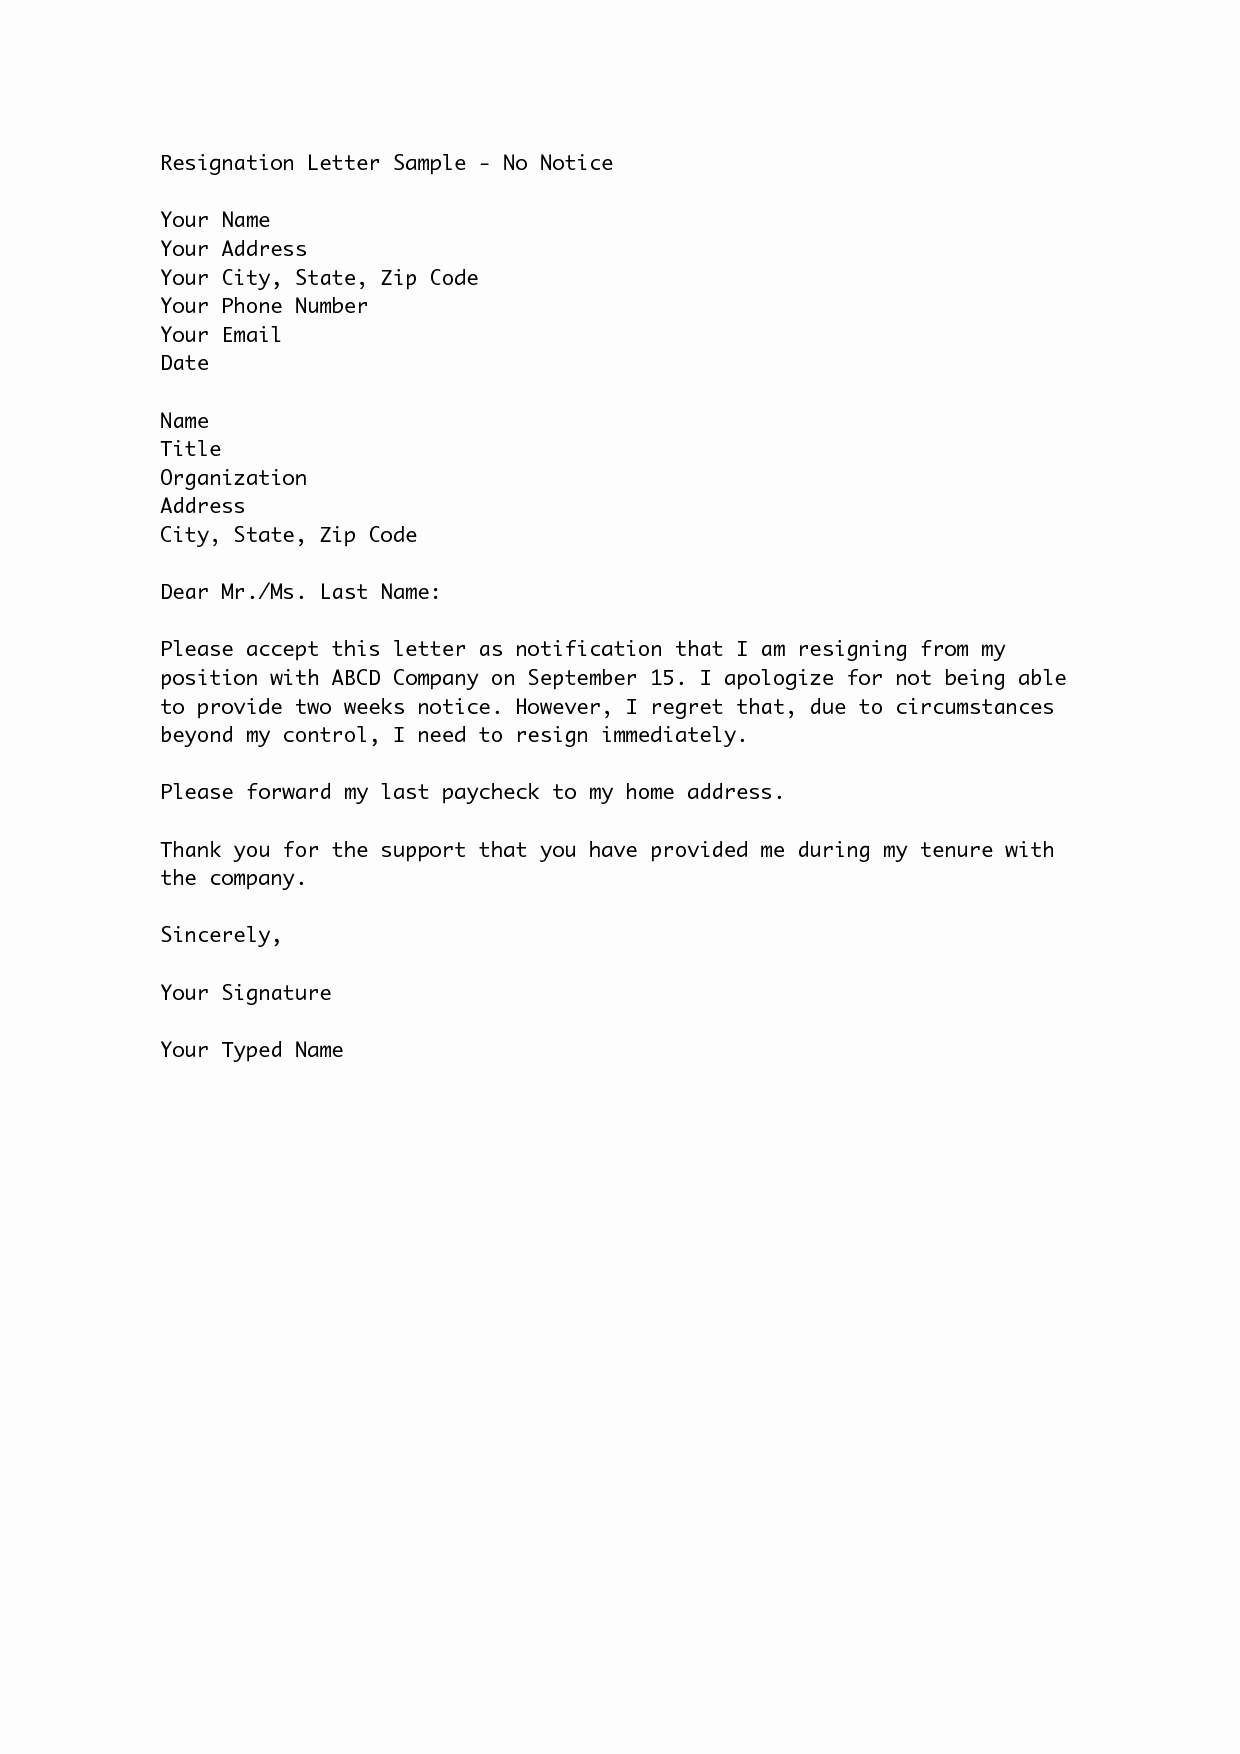 Resignation Letter Two Weeks Notice Awesome Two Weeks’ Notice Resignation Letter Samples